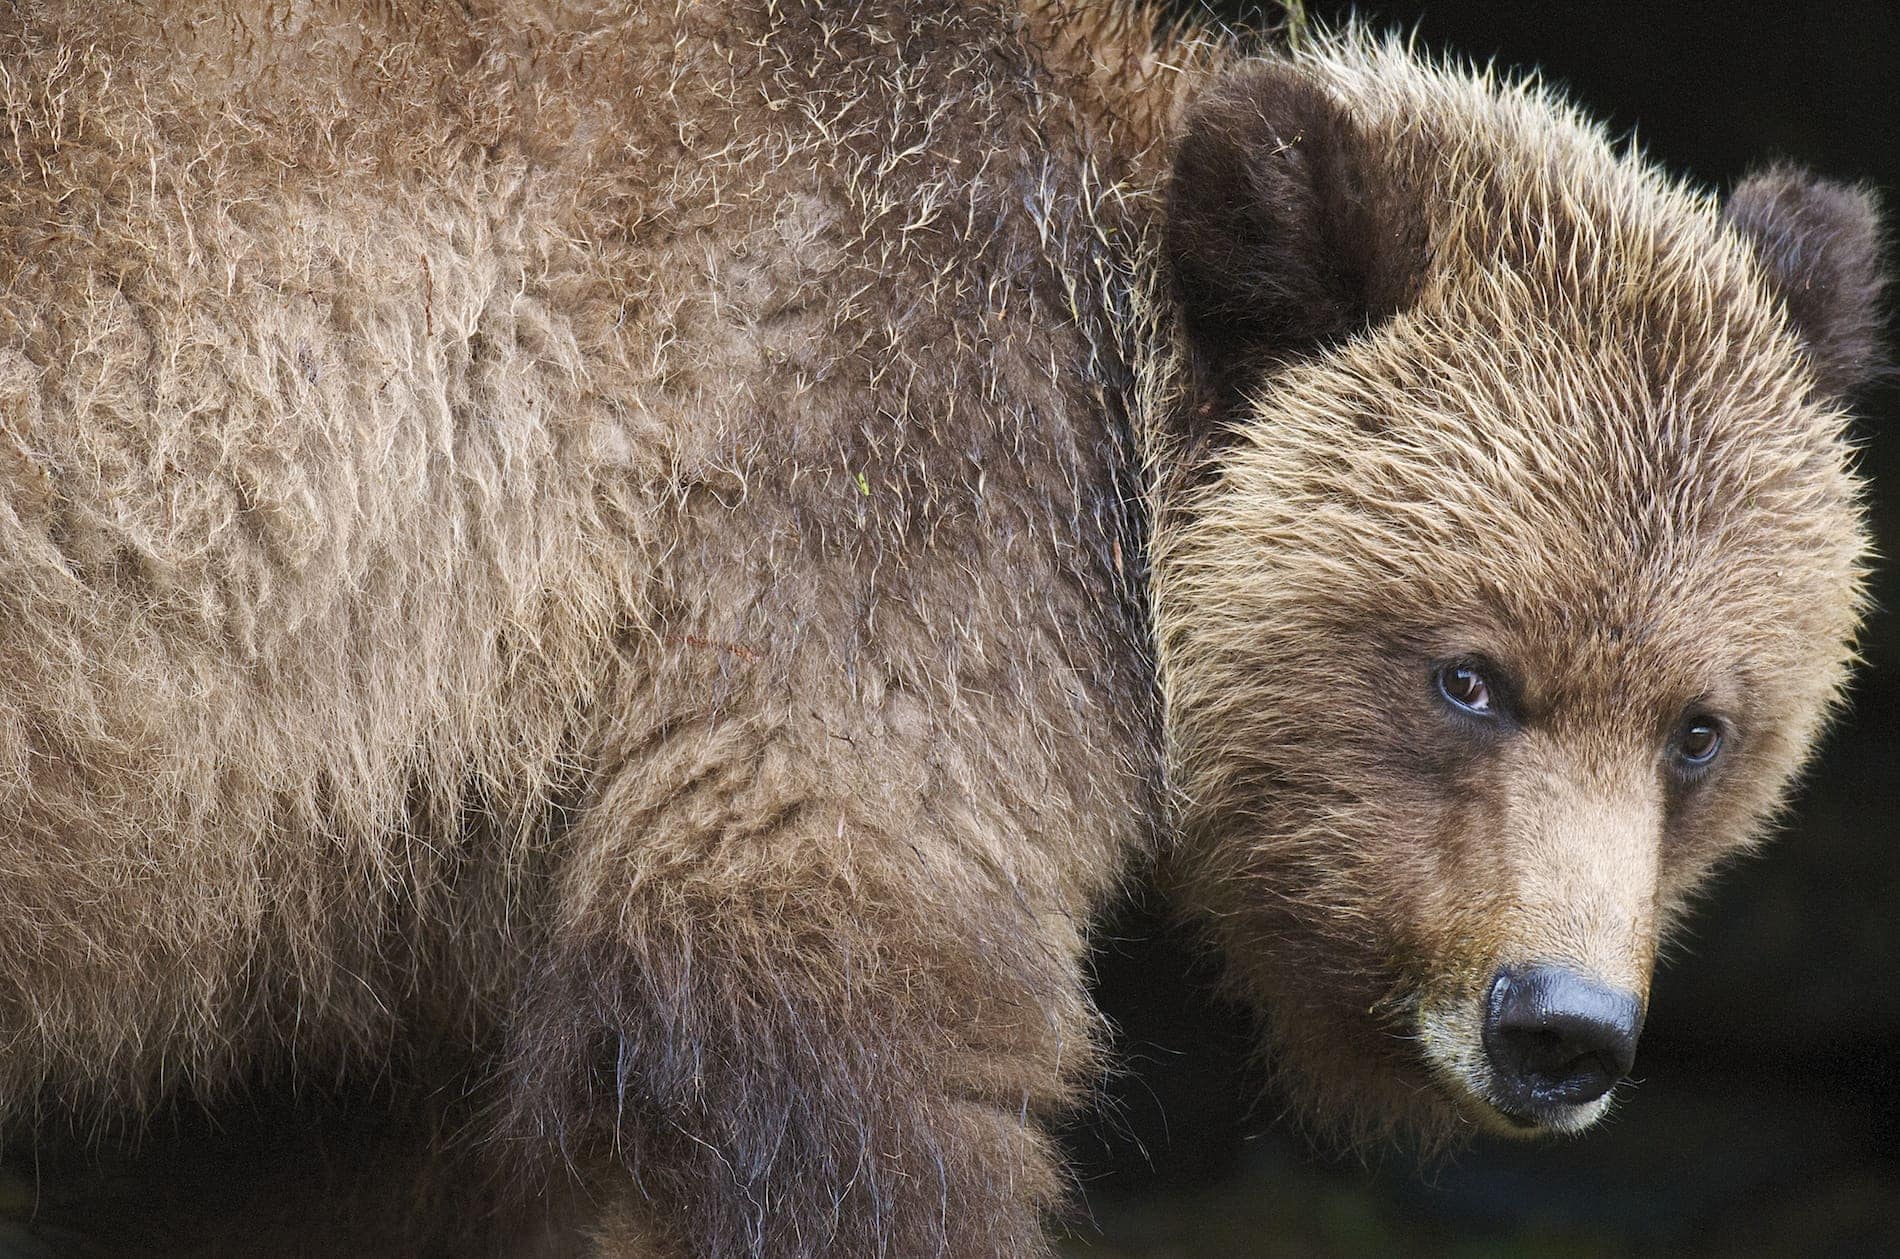 Photo: Grizzly Bear Close Up  | Credit: James Thompson